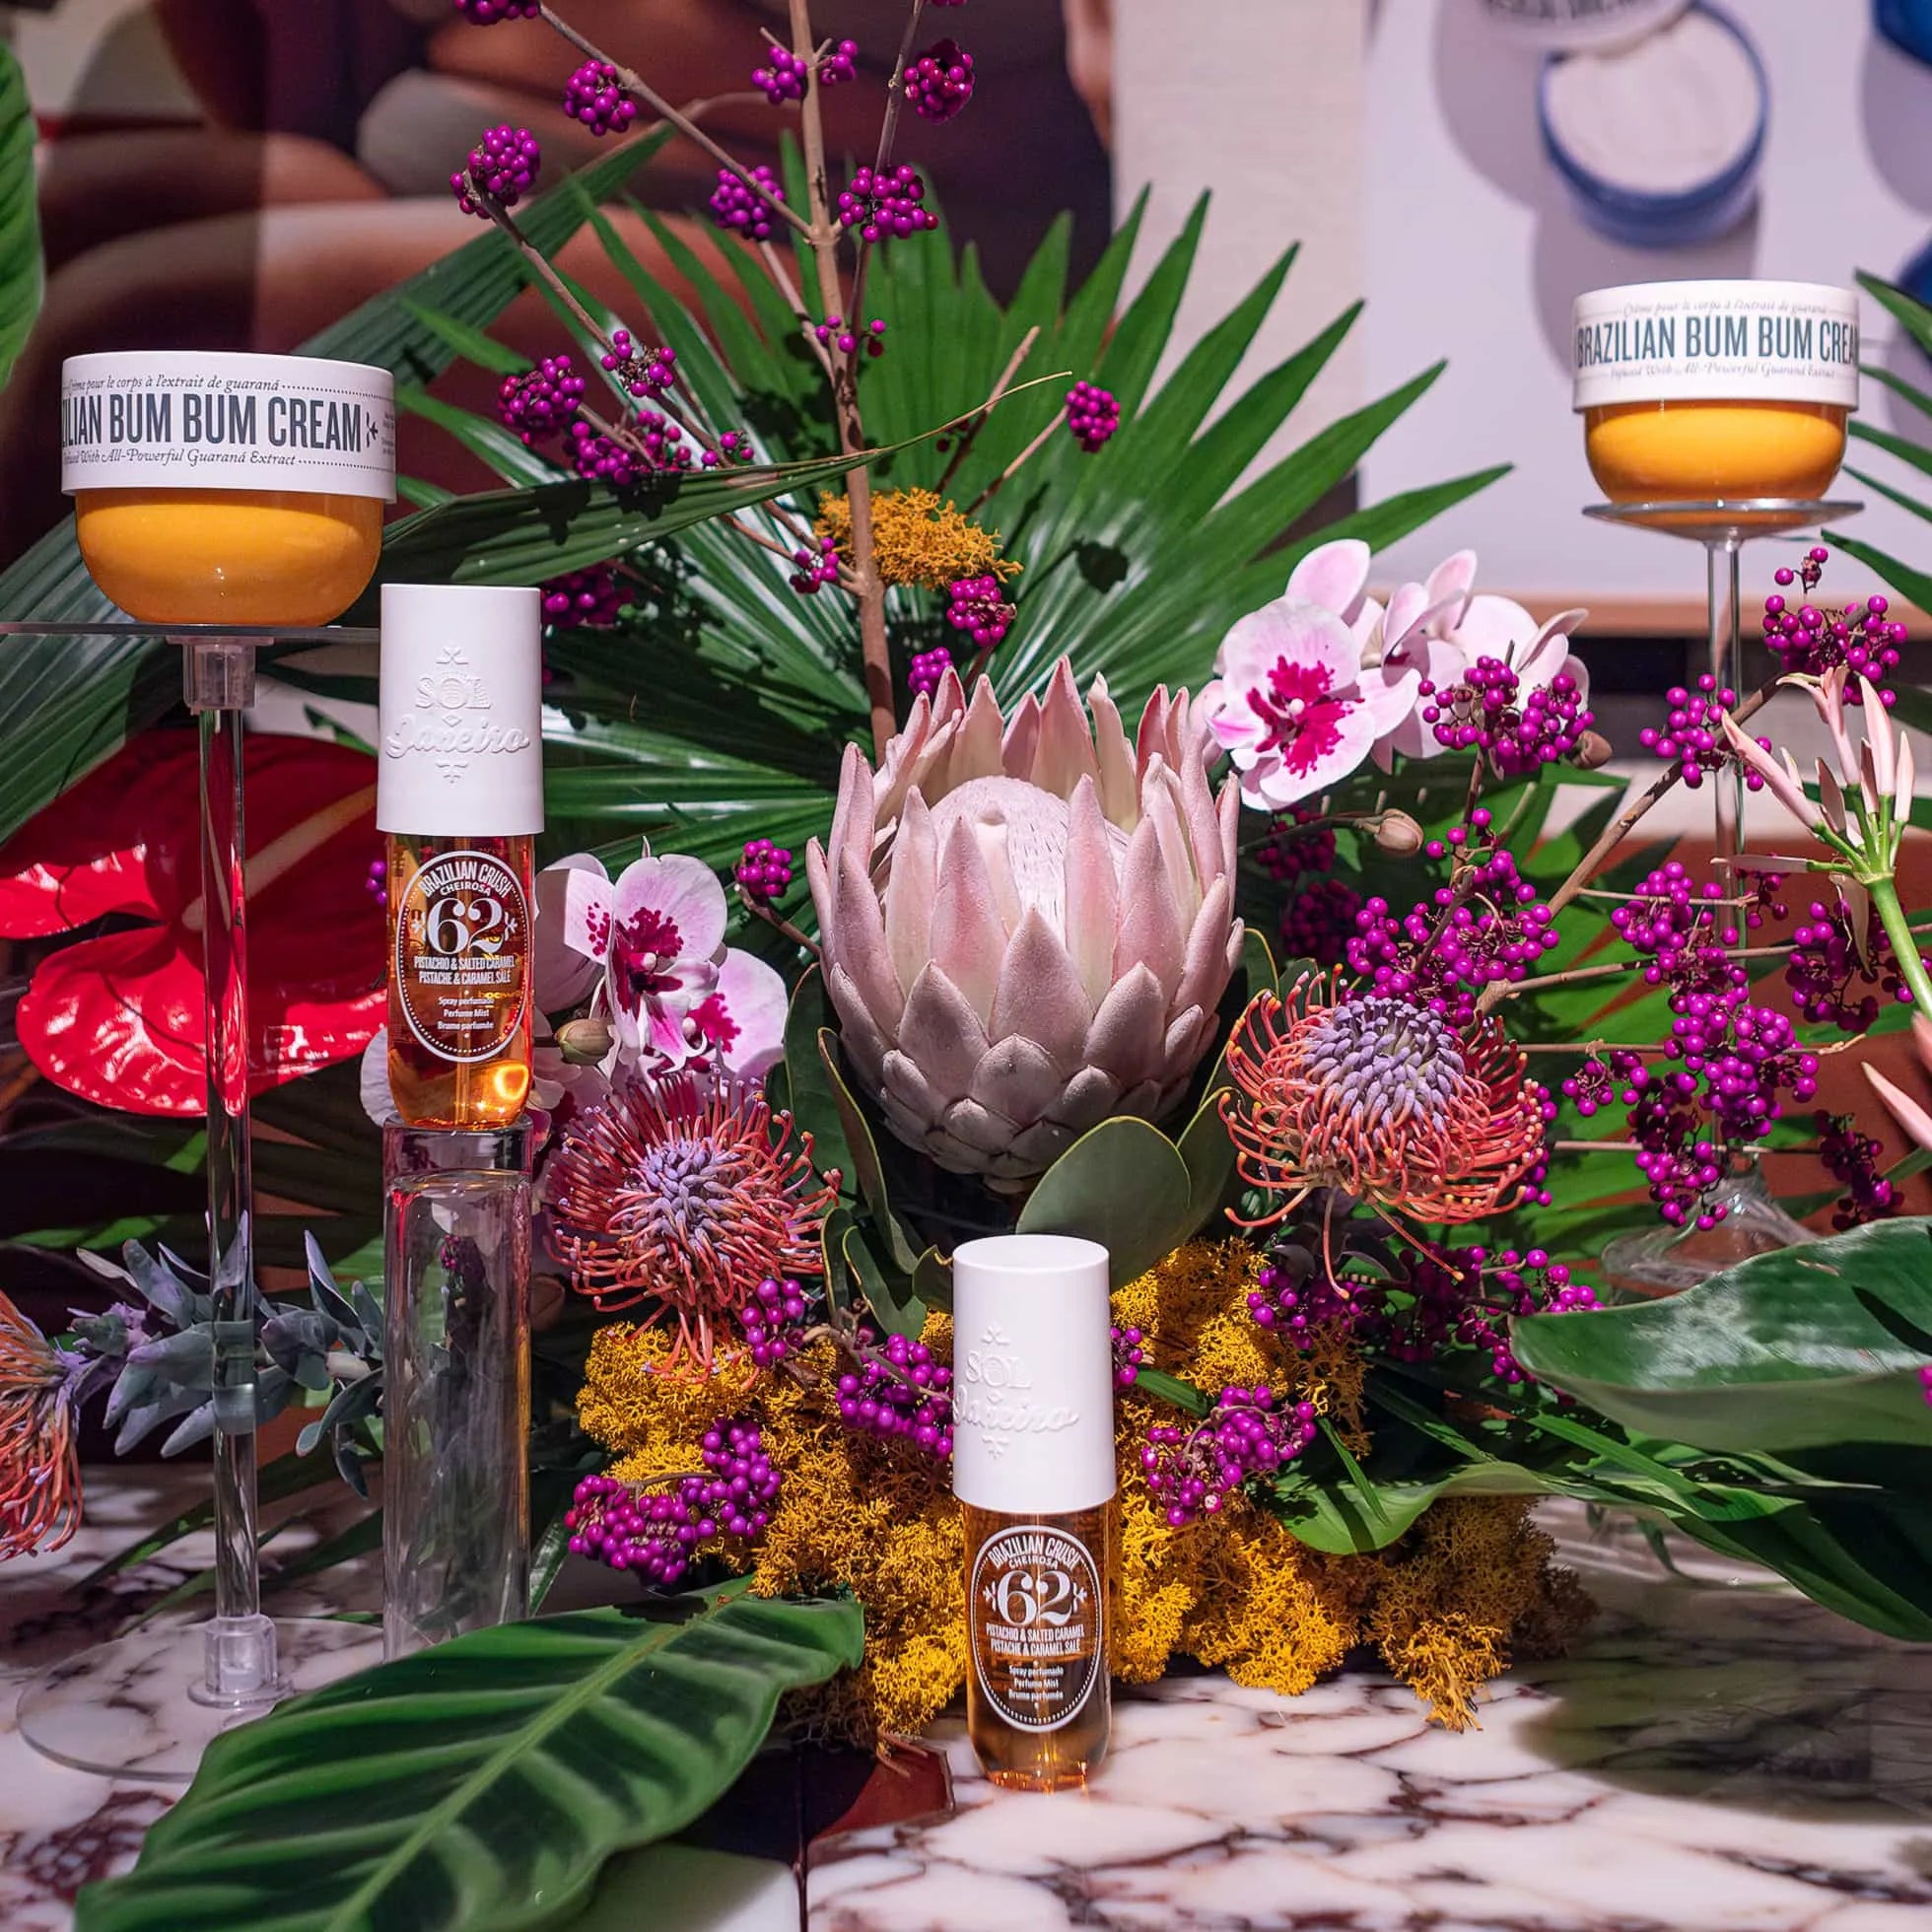 Close-up of Sol de Janeiro's Brazilian Bum Bum Cream and body spray elegantly displayed among a rich array of Amaranté London's floral arrangements with orchids, proteas, and tropical leaves.